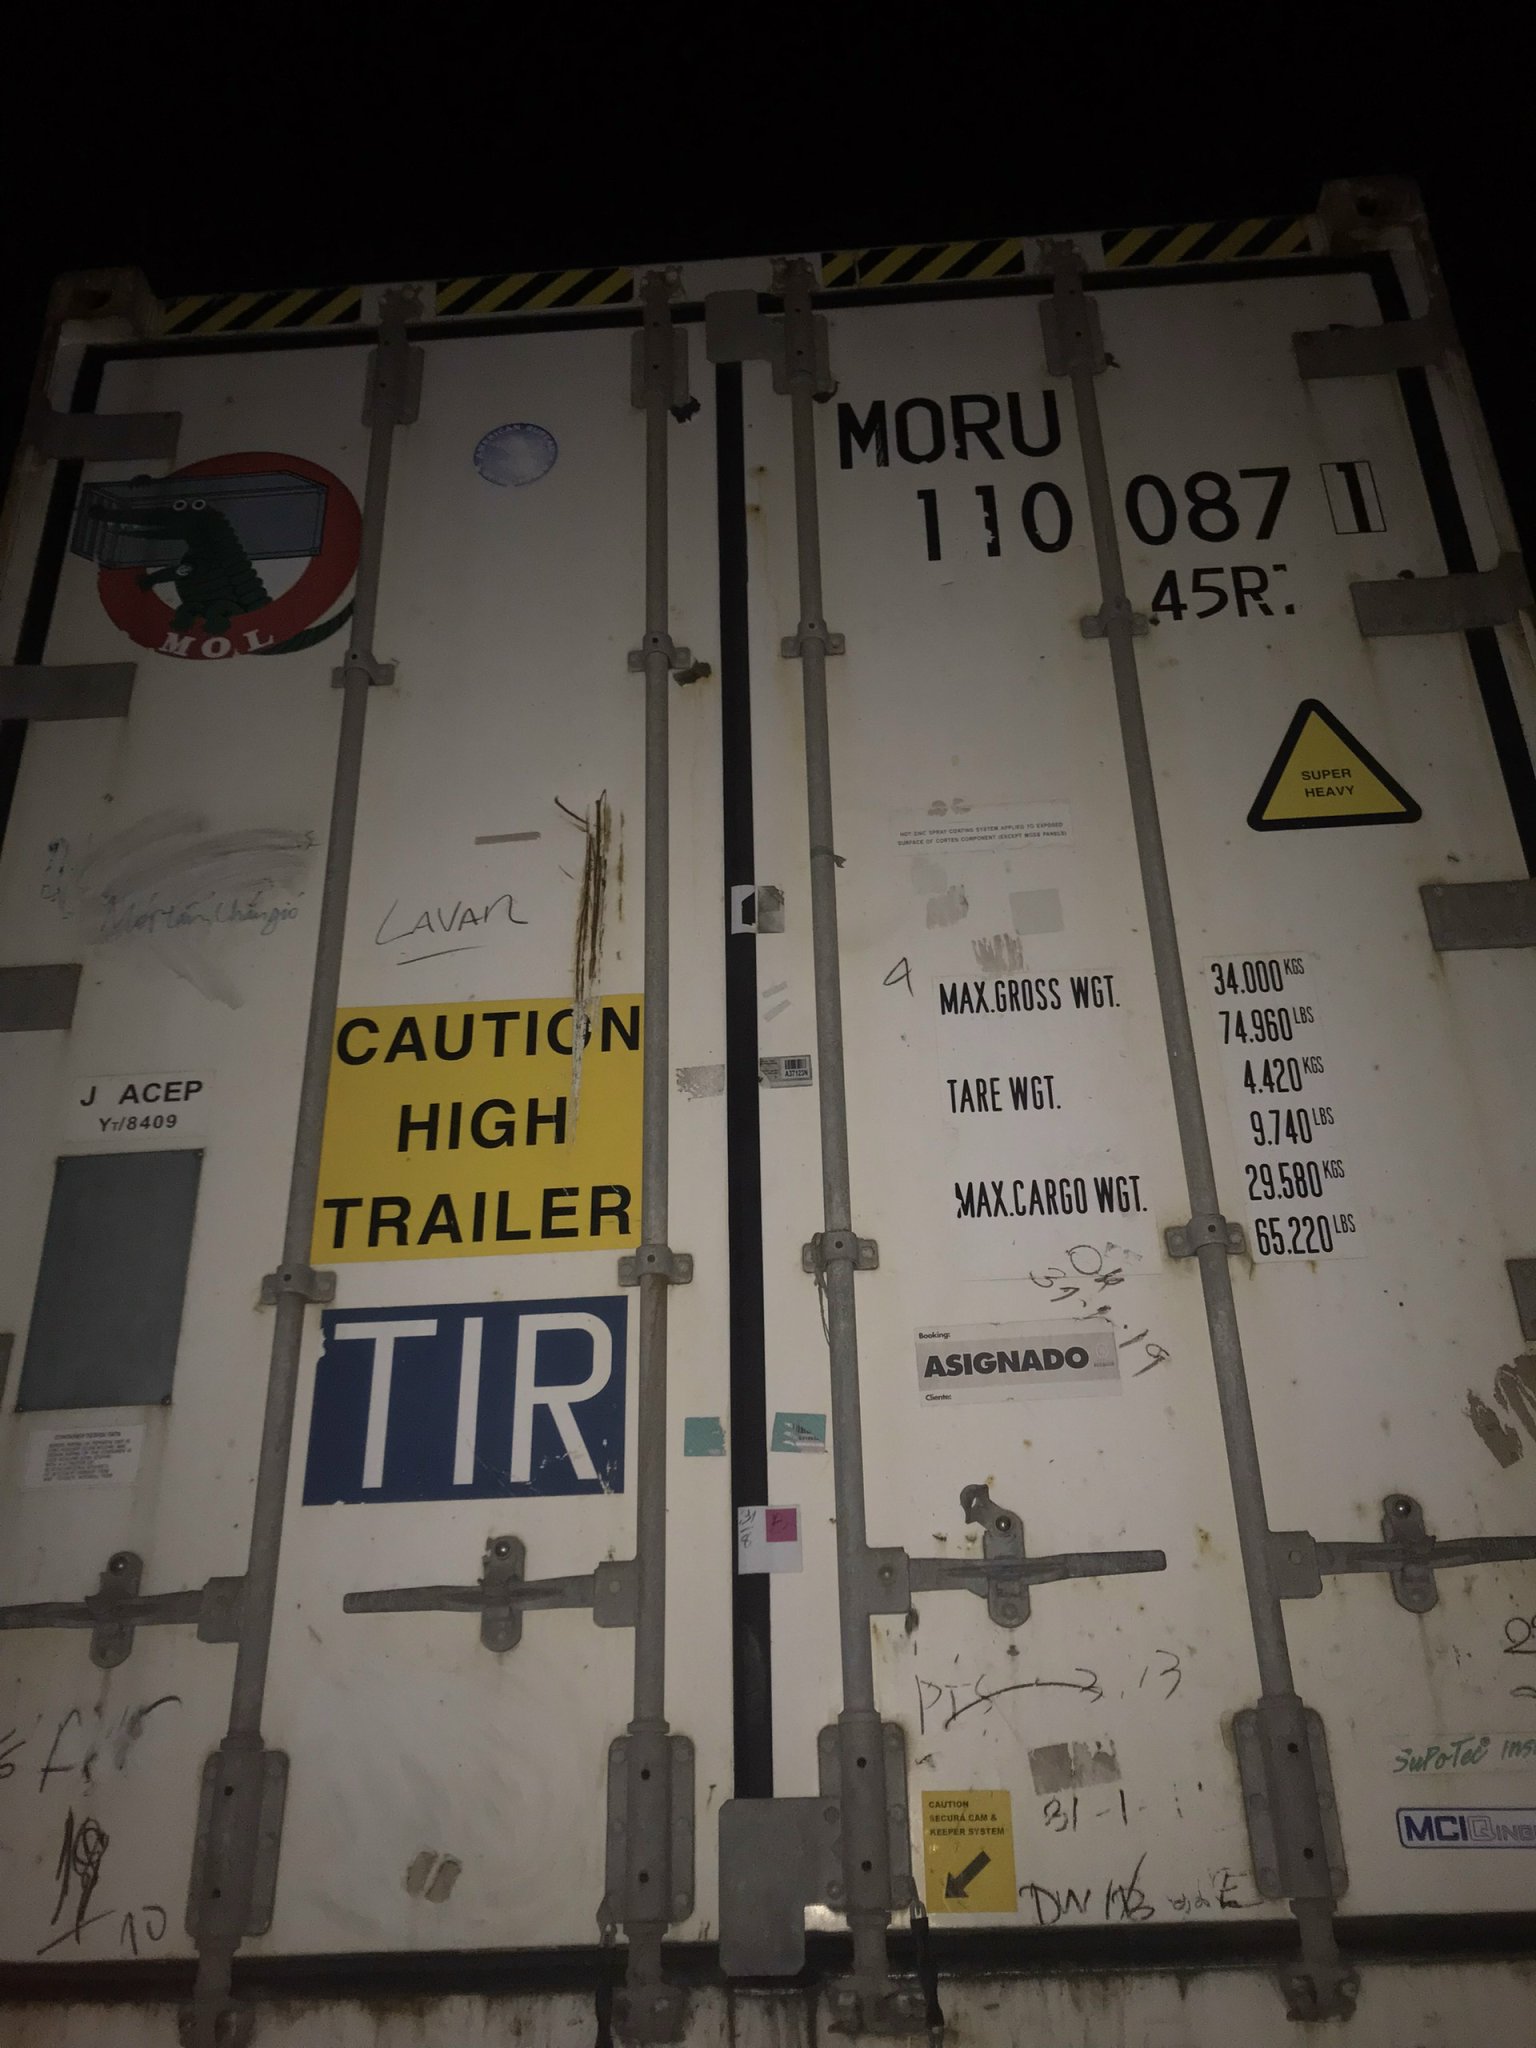 CONTAINER LẠNH 40RH: MORU 1100871